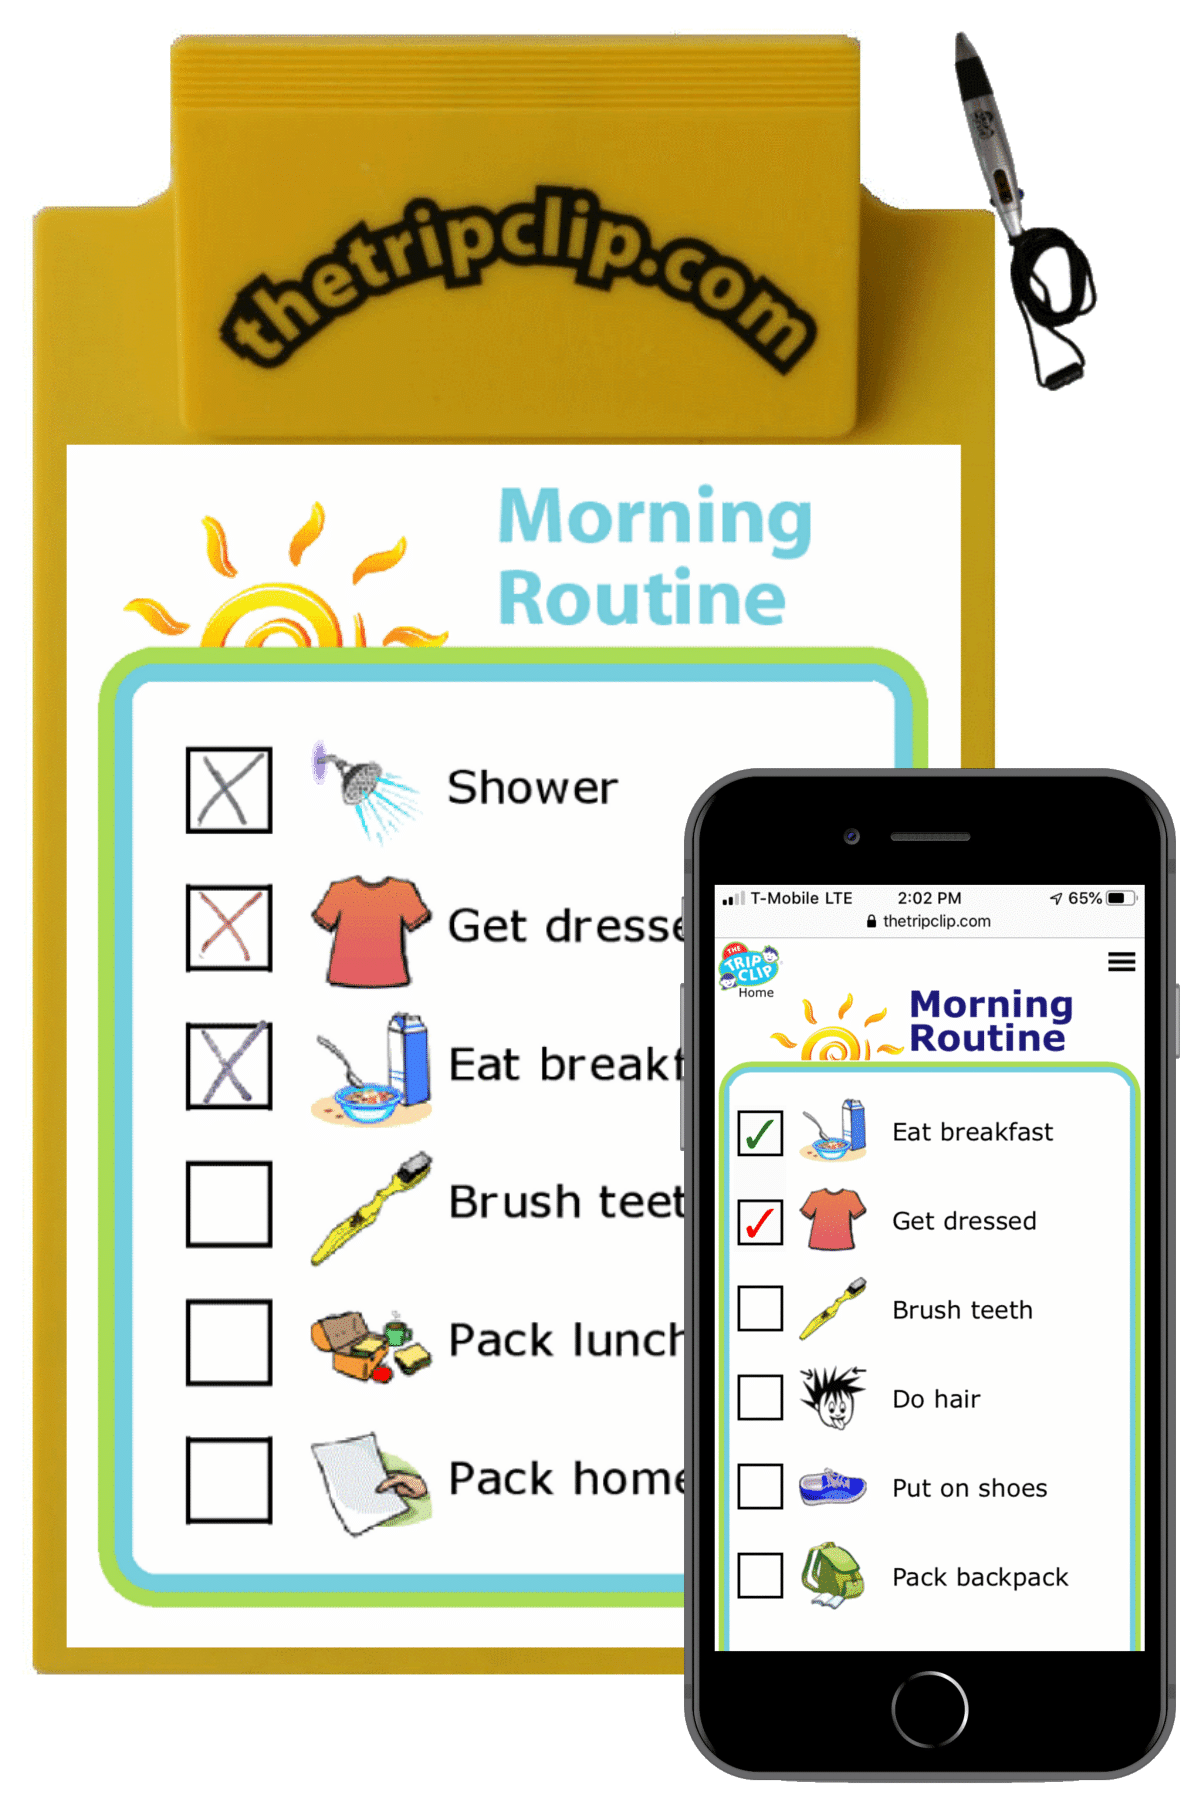 Morning routine picture checklist for kids